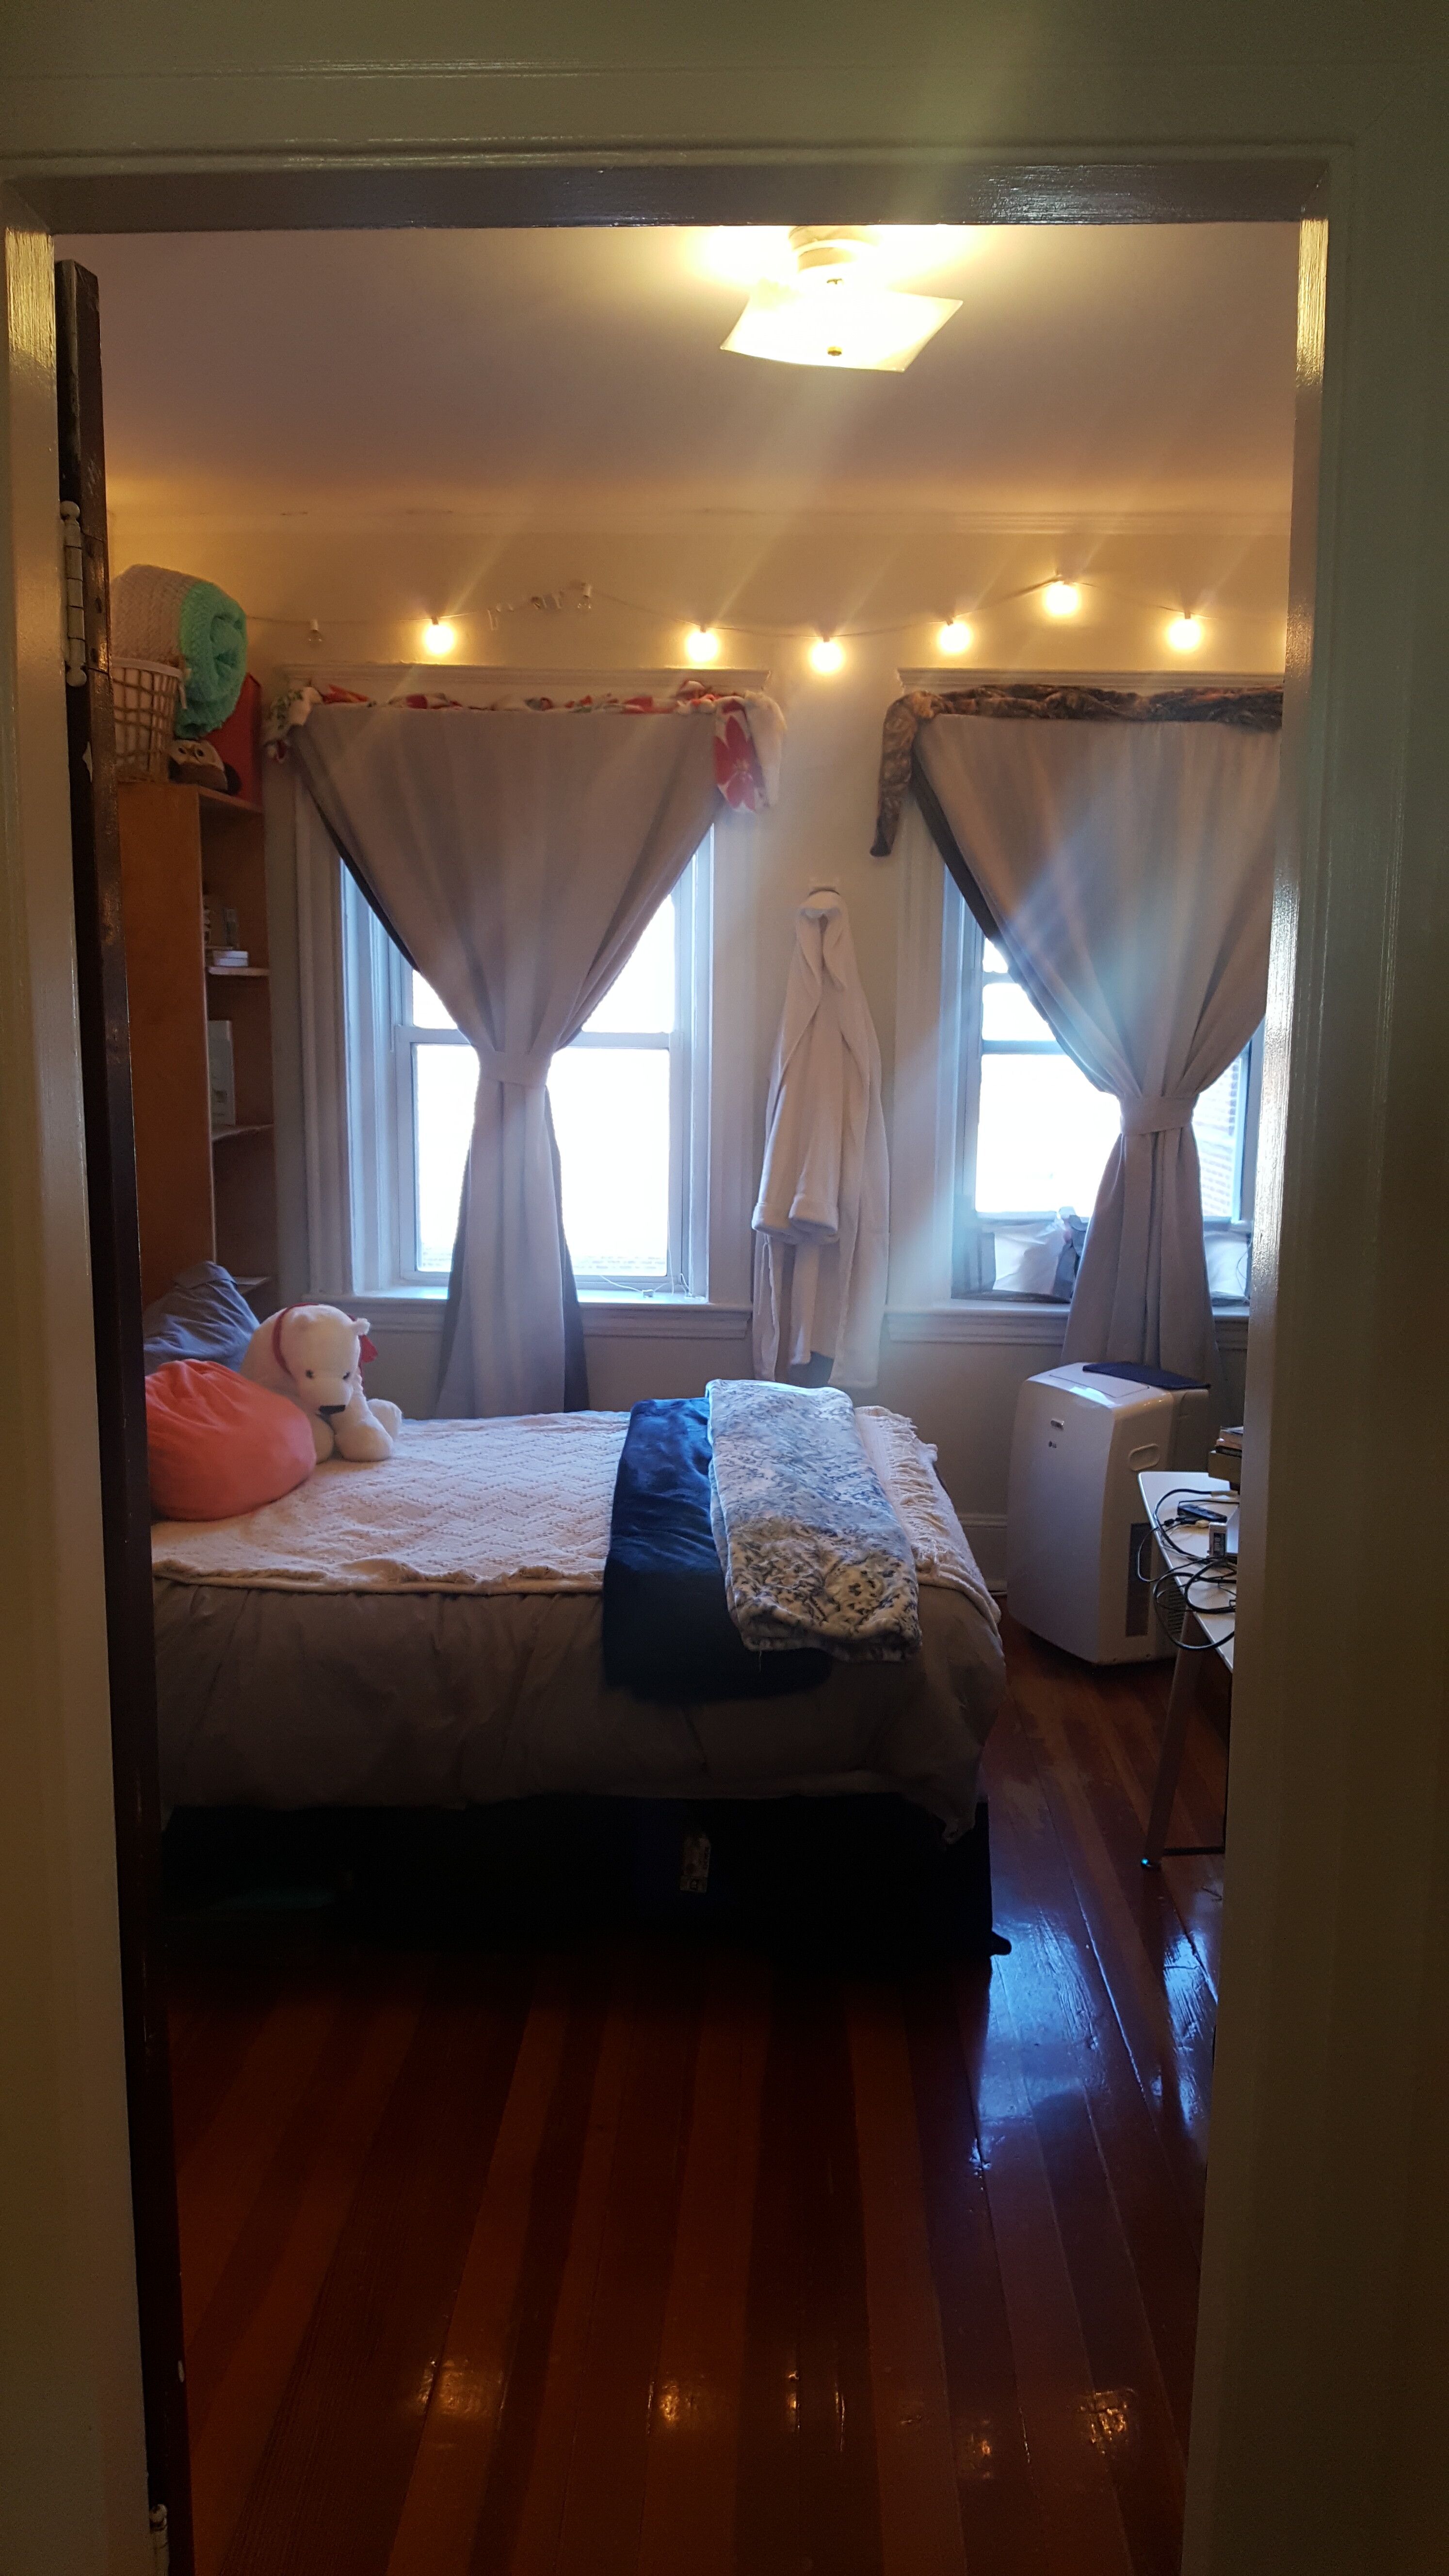 Photos of apartment on Summer,Somerville MA 02143